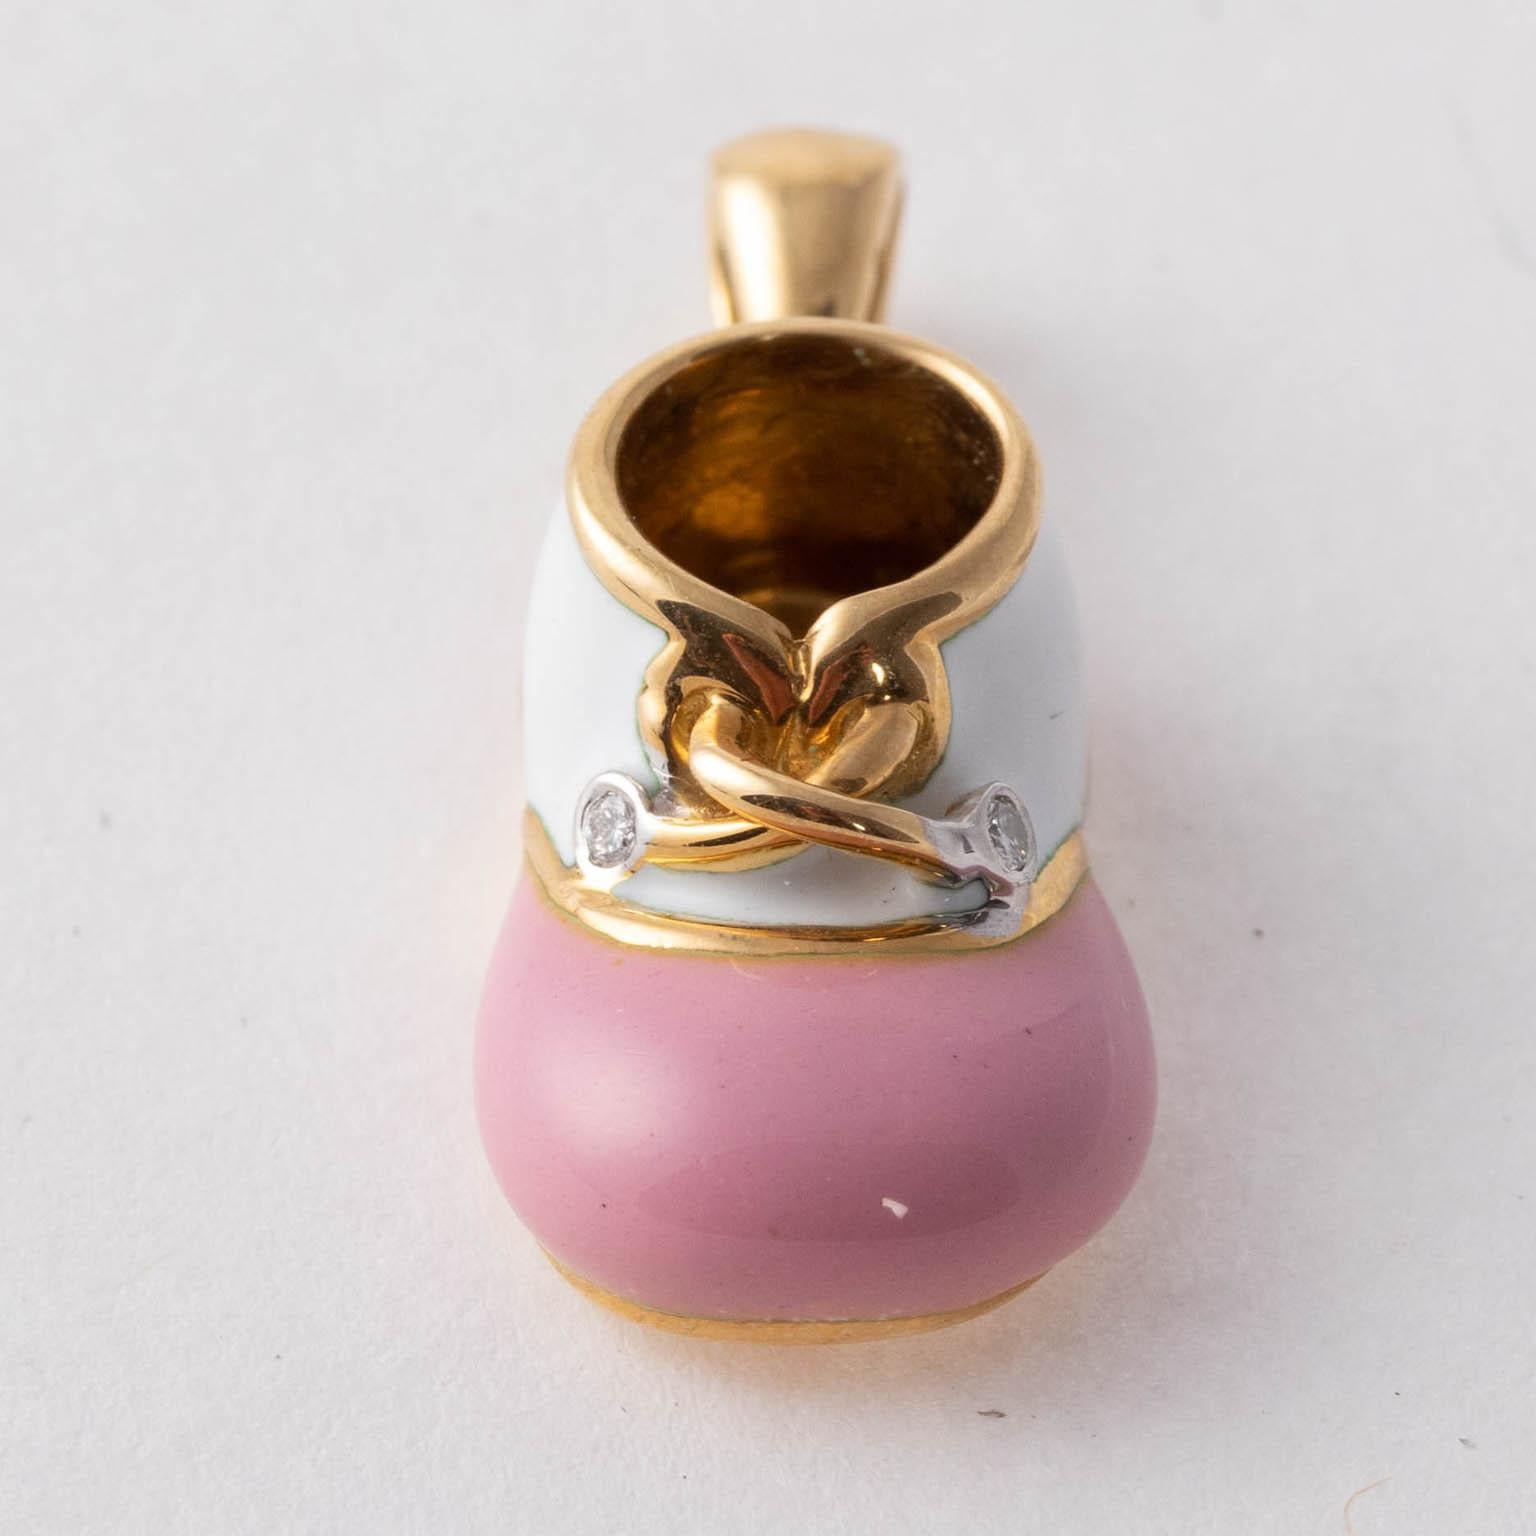 Circa late 20th century baby shoe by Felix Vollman detailed in pink and white enamel accented with an 18 karat Gold lace and two diamonds. The piece can be worn for either a necklace pendant or charm bracelet. Please note of wear consistent with